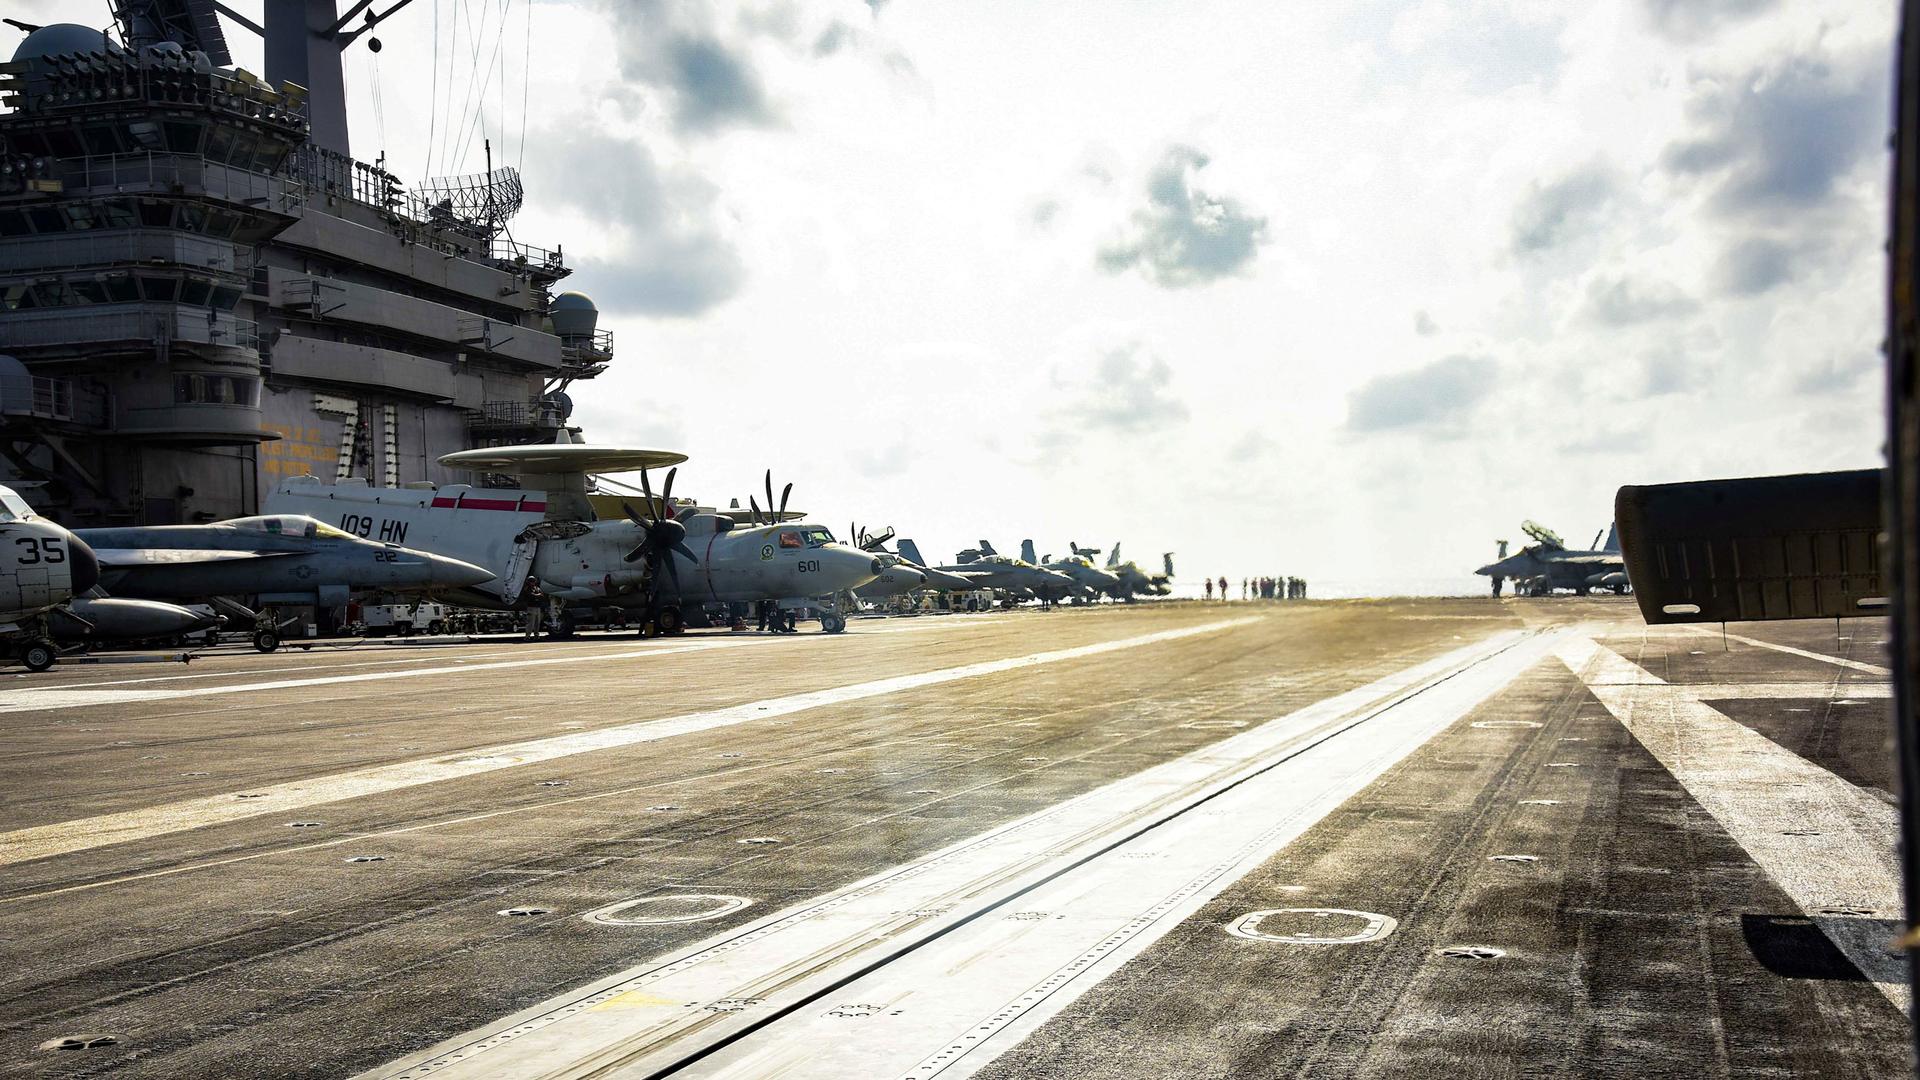 A photograph taken from the deck of the USS Theodore Roosevelt aircraft carrier with the ship's tower and several airplanes in the background.